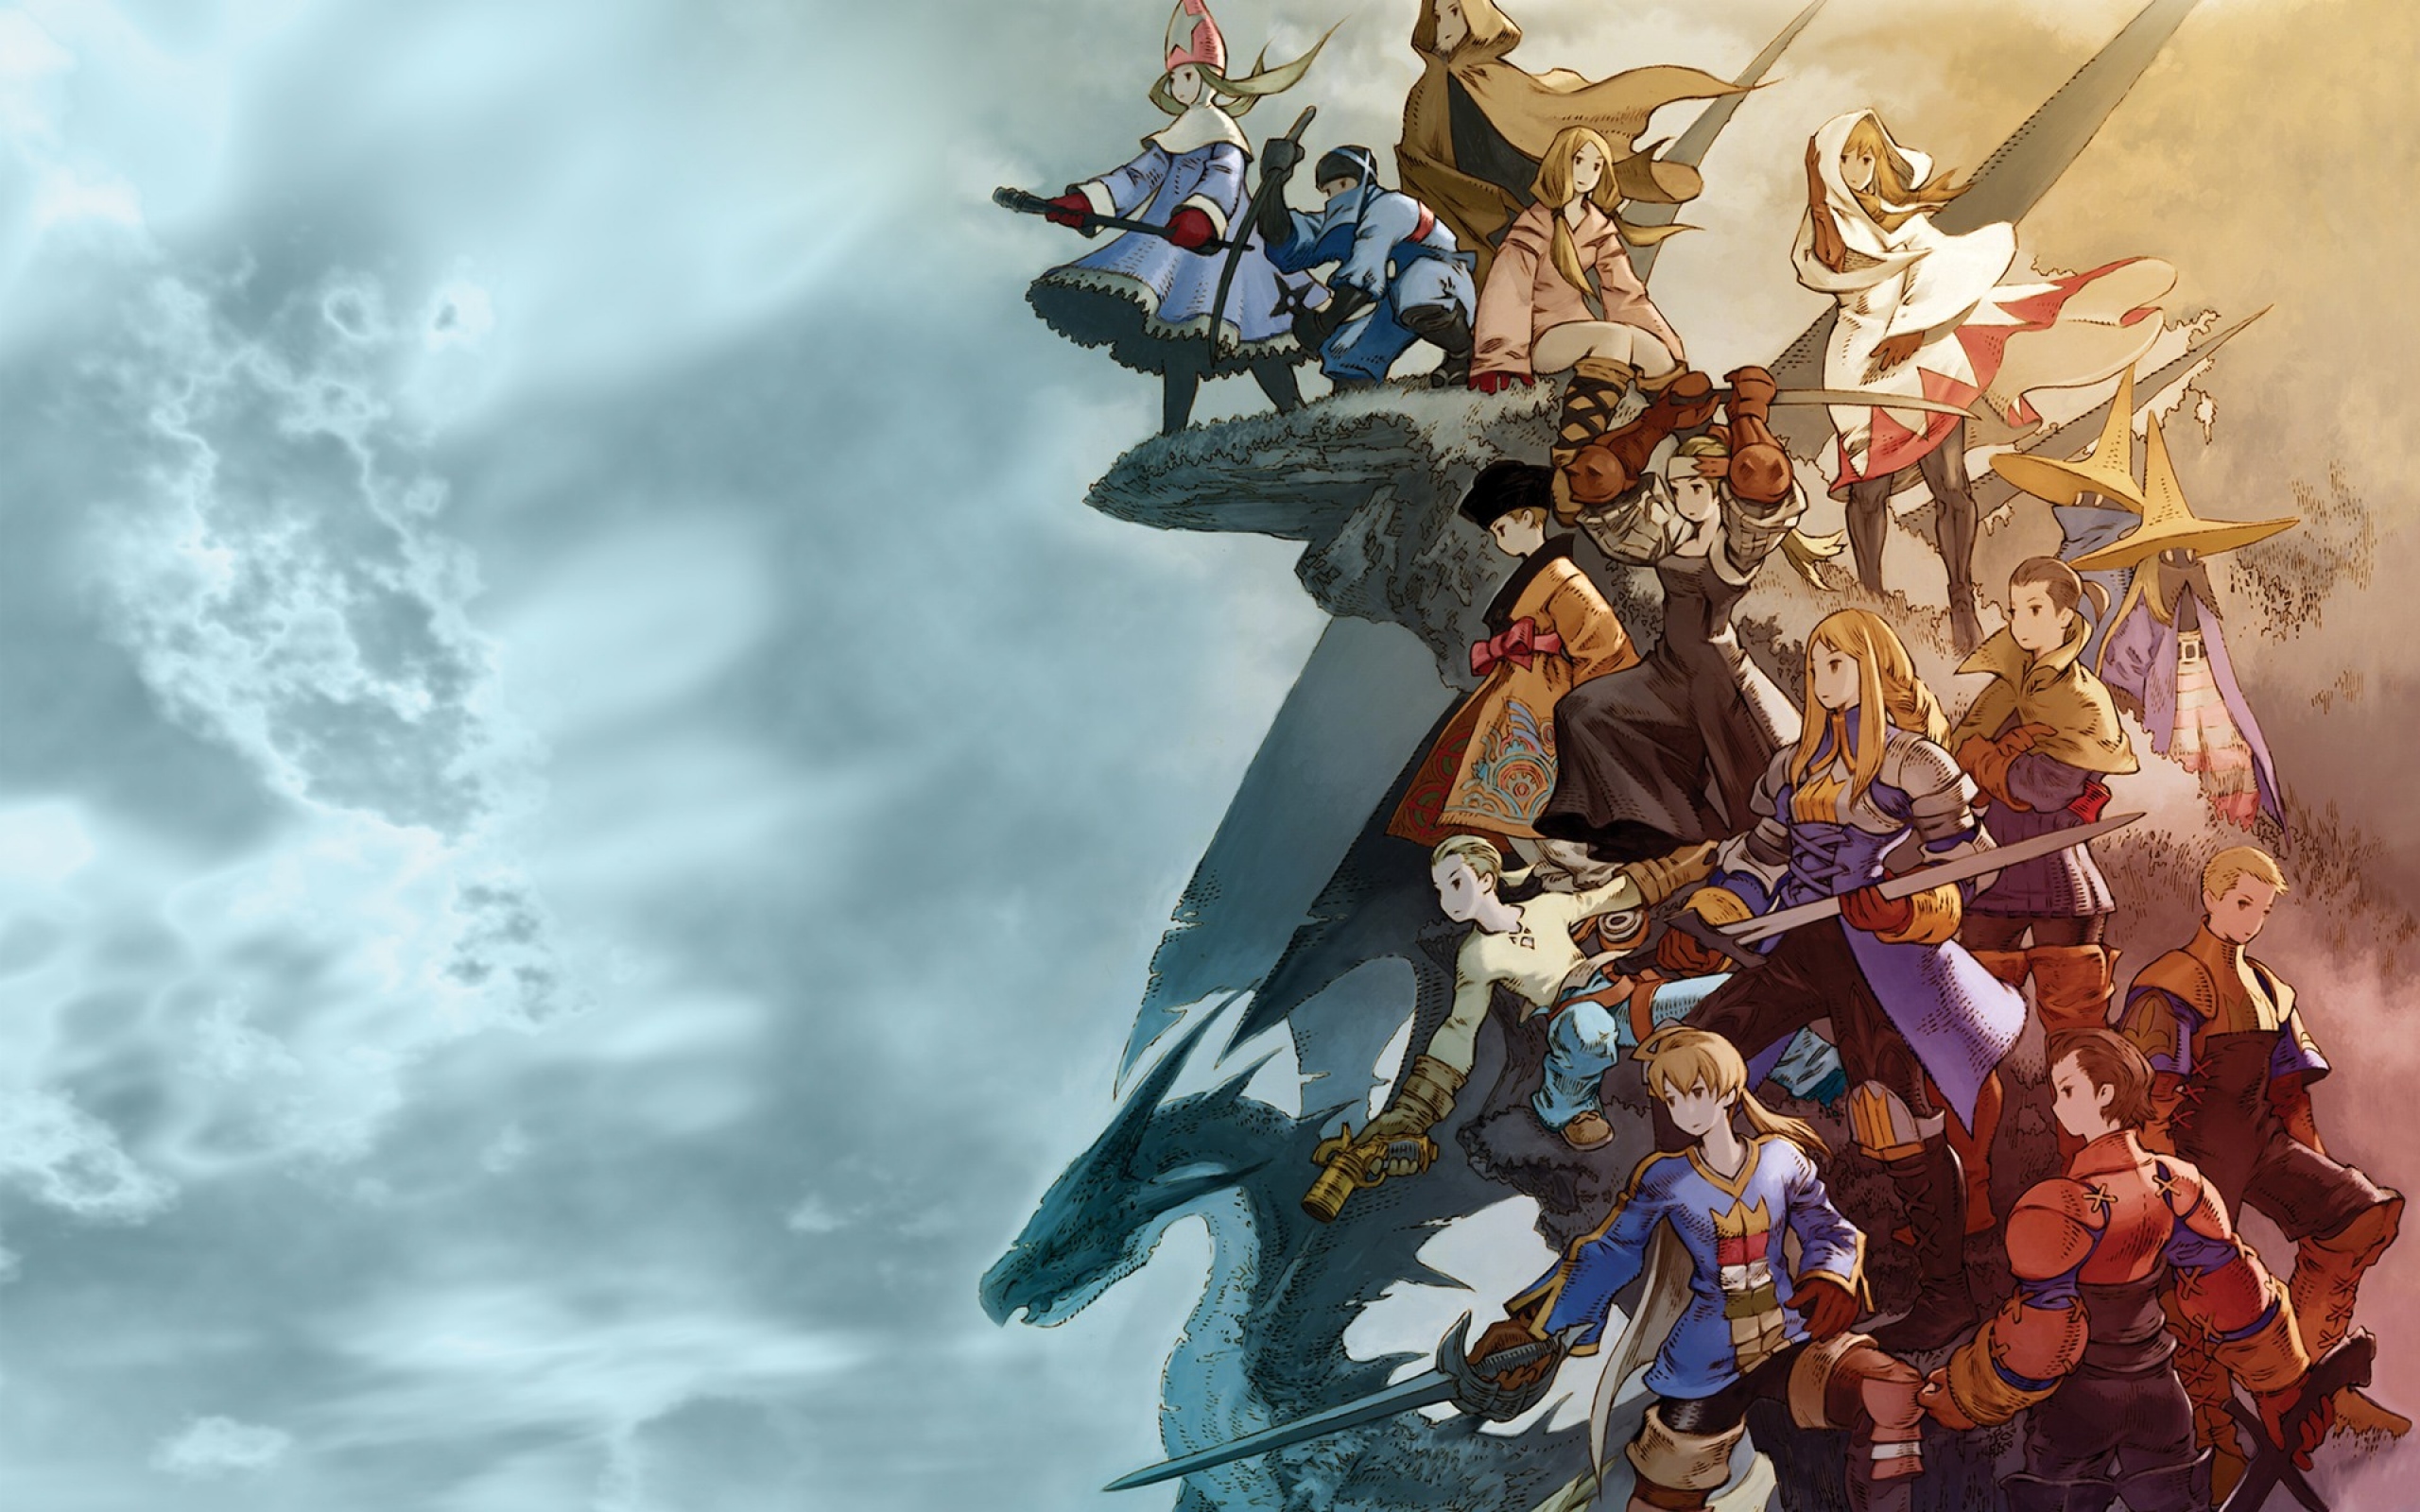 Free Download 2560x1600 Final Fantasy Tactics Desktop Pc And Mac Wallpaper 2560x1600 For Your Desktop Mobile Tablet Explore 47 Awesome Ff7 Wallpaper Ffxiii Wallpaper Ff7 Remake Wallpaper Reno Ff7 Wallpaper